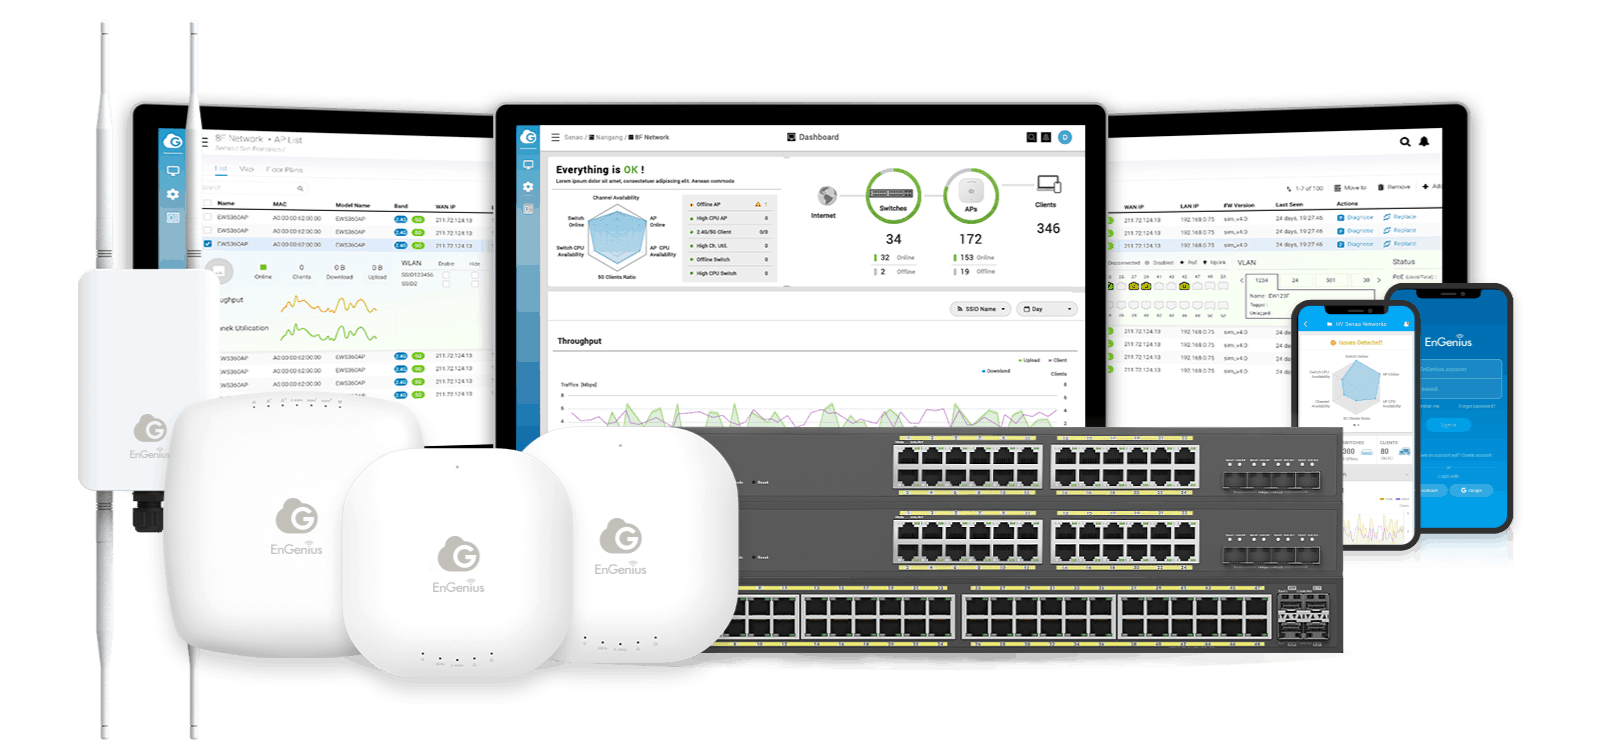 Engenius Cloud Review with ECS1008P POE Switch & ECW120 Access Point– Cloud-managed hardware with no subscription costs or cloud key